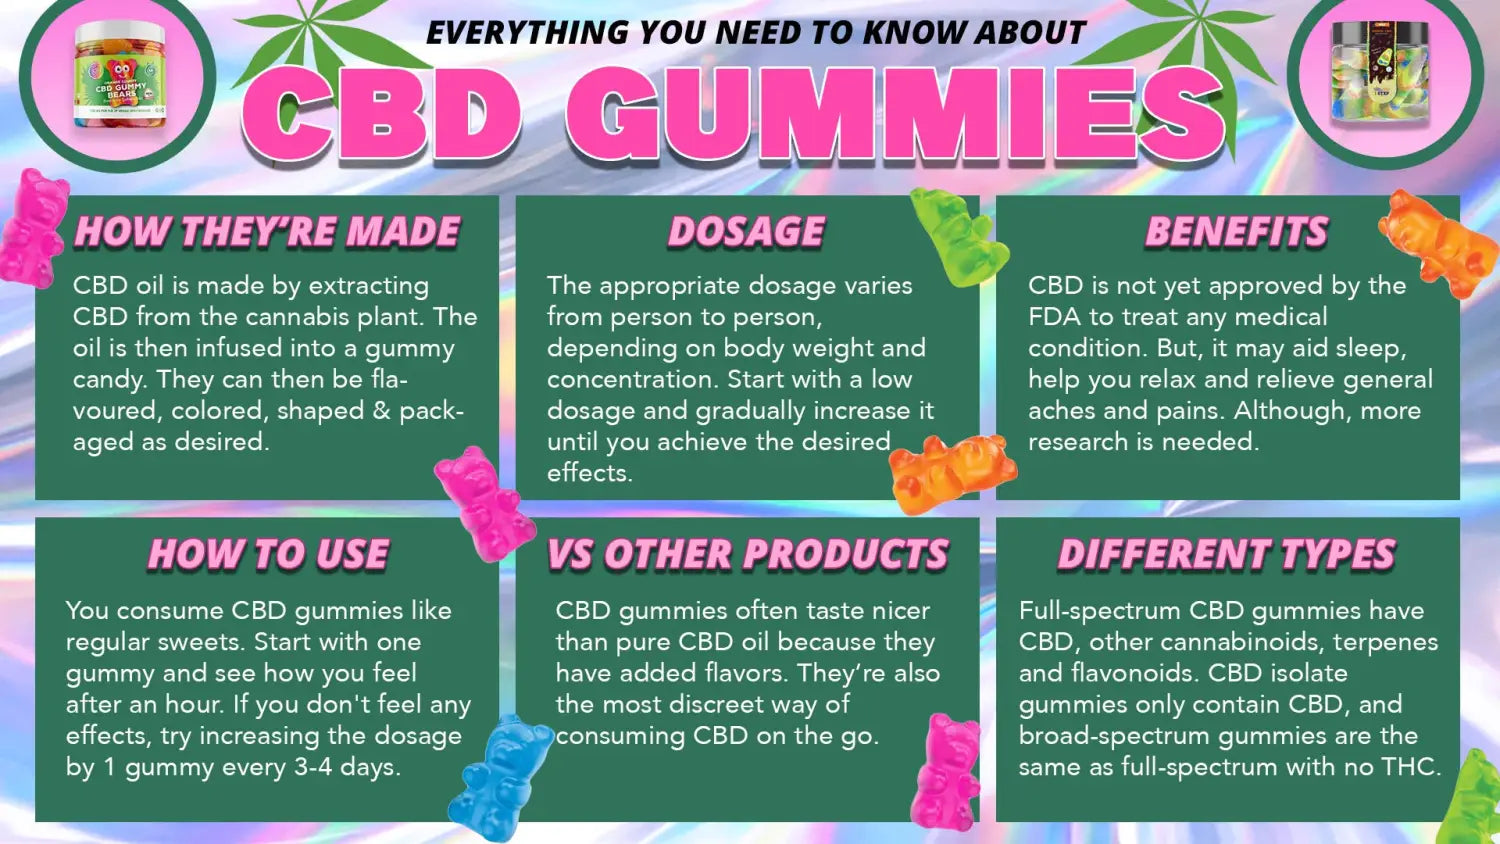 BEST CBD GUMMIES FOR ANXIETY RECOMMENDED BY DR. LAURA